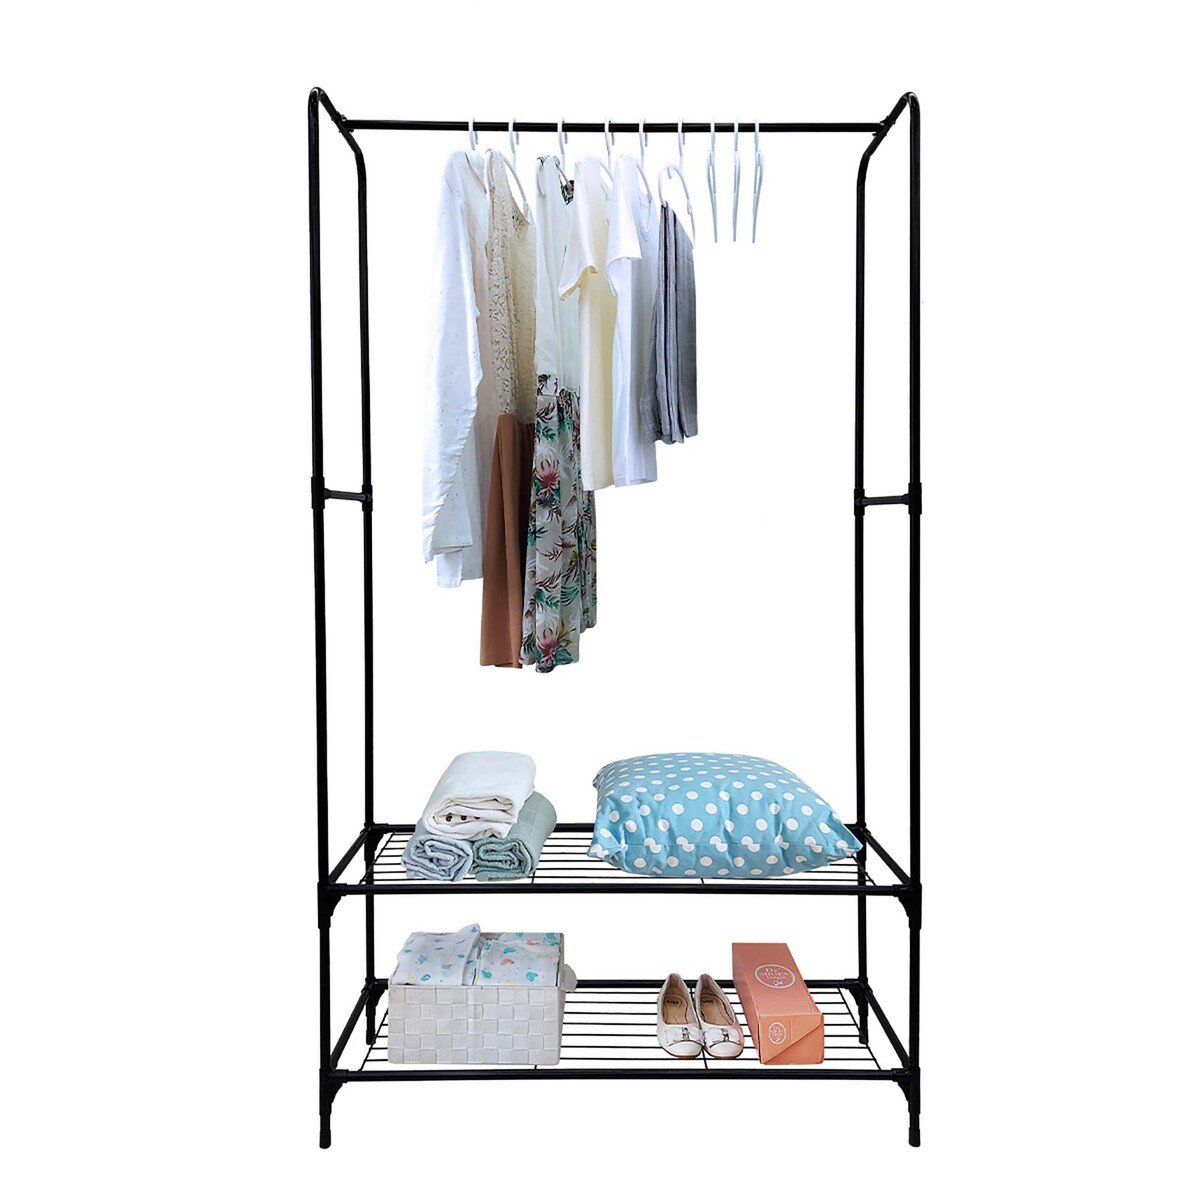 Maple Leaf Metal Clothes Hanger With 2Shelf Tiers, W34xL98xH170cm STS05